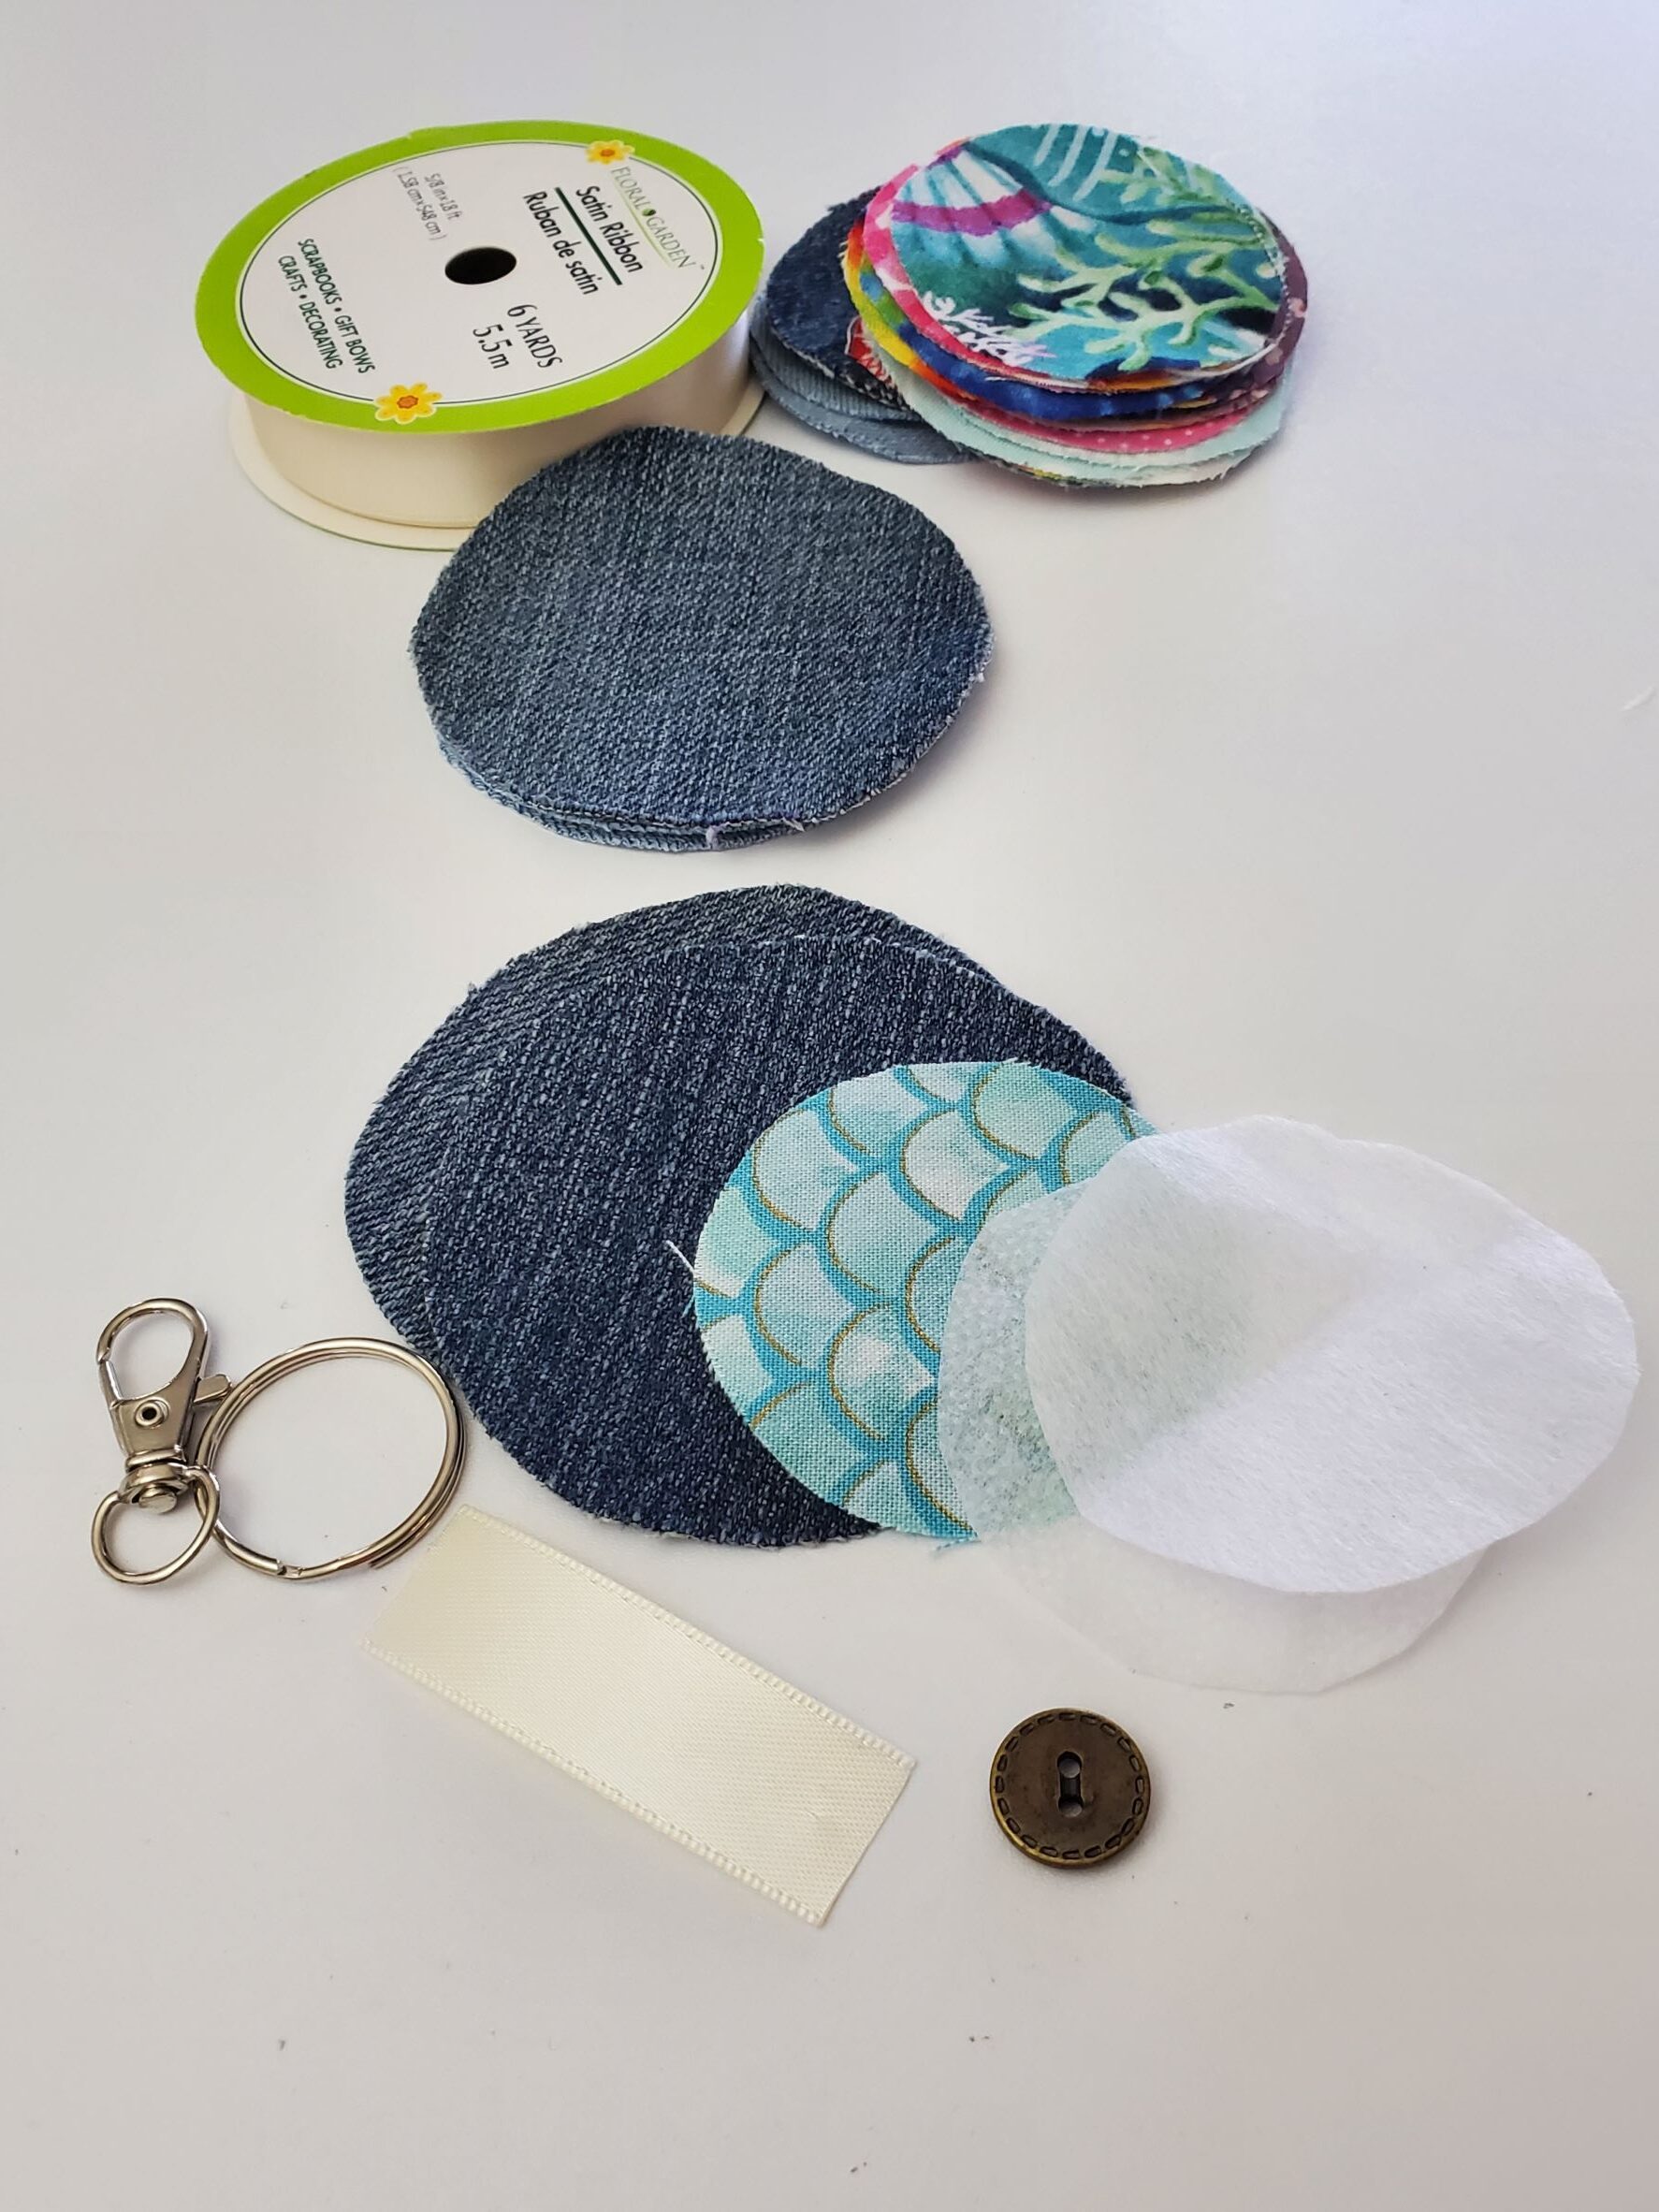 How To Sew An Upcycled Keychain From Old Denim & Fabric Scraps